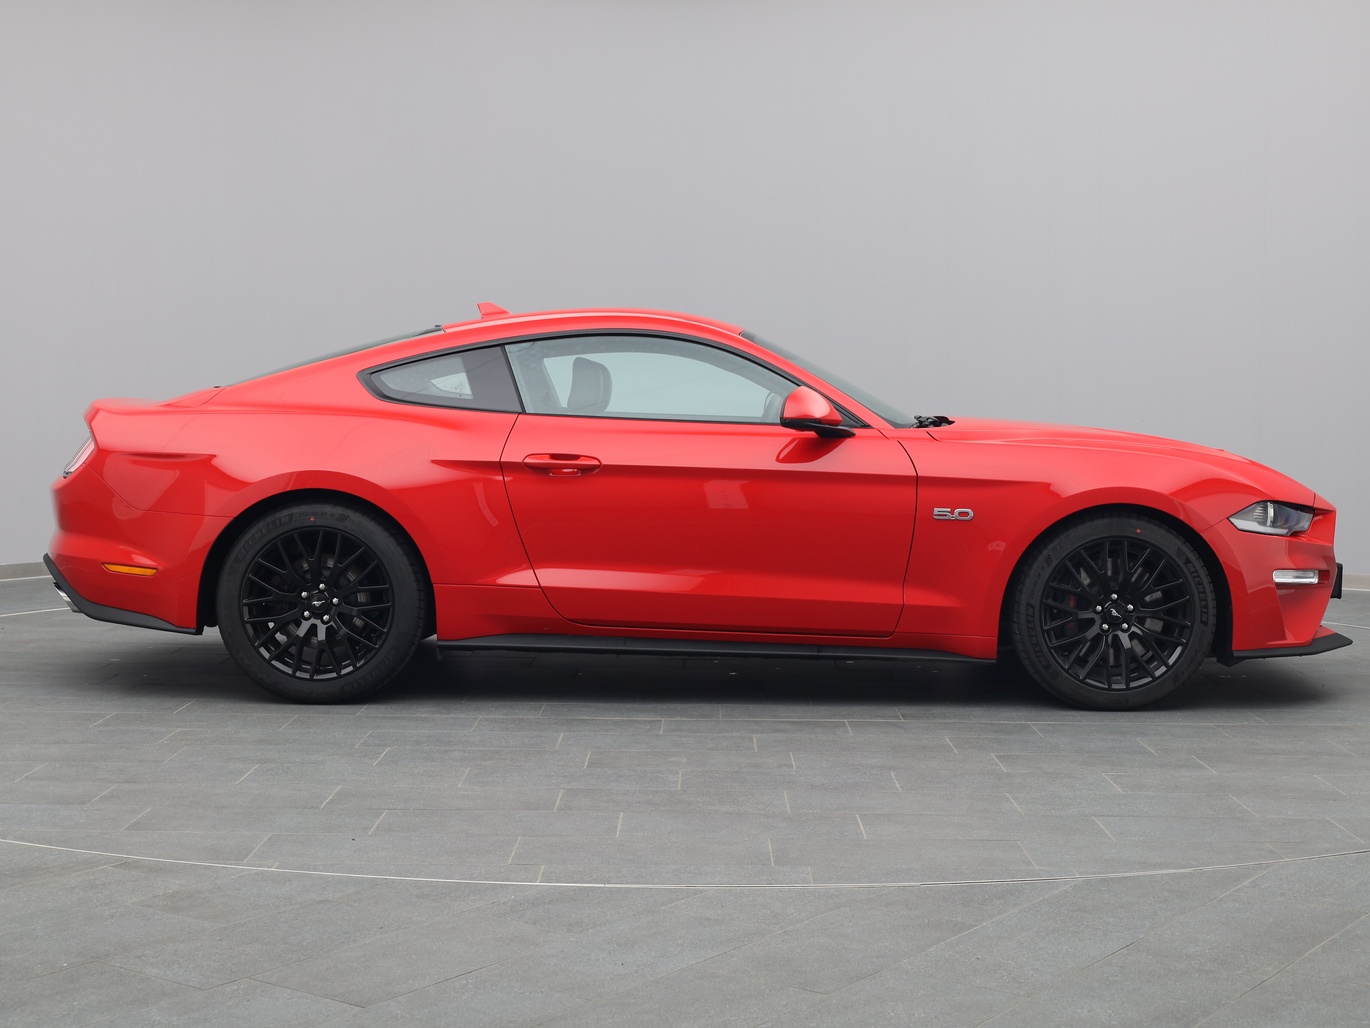  Ford Mustang GT Coupé V8 450PS / Premium 2 / Magne in Race-rot von Rechts